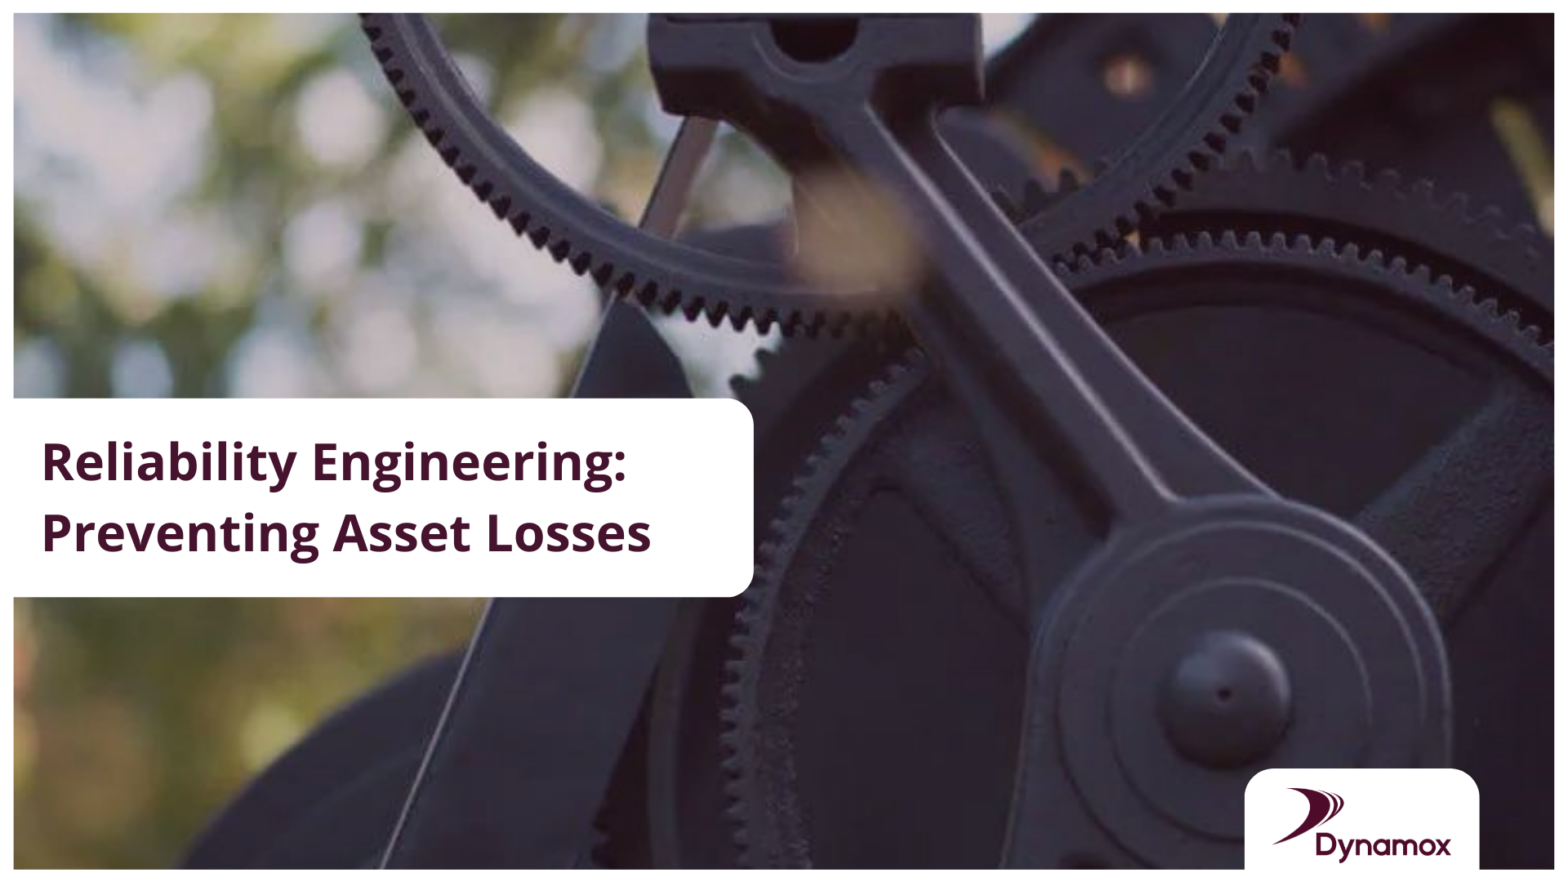 Reliability Engineering: Preventing Asset Losses